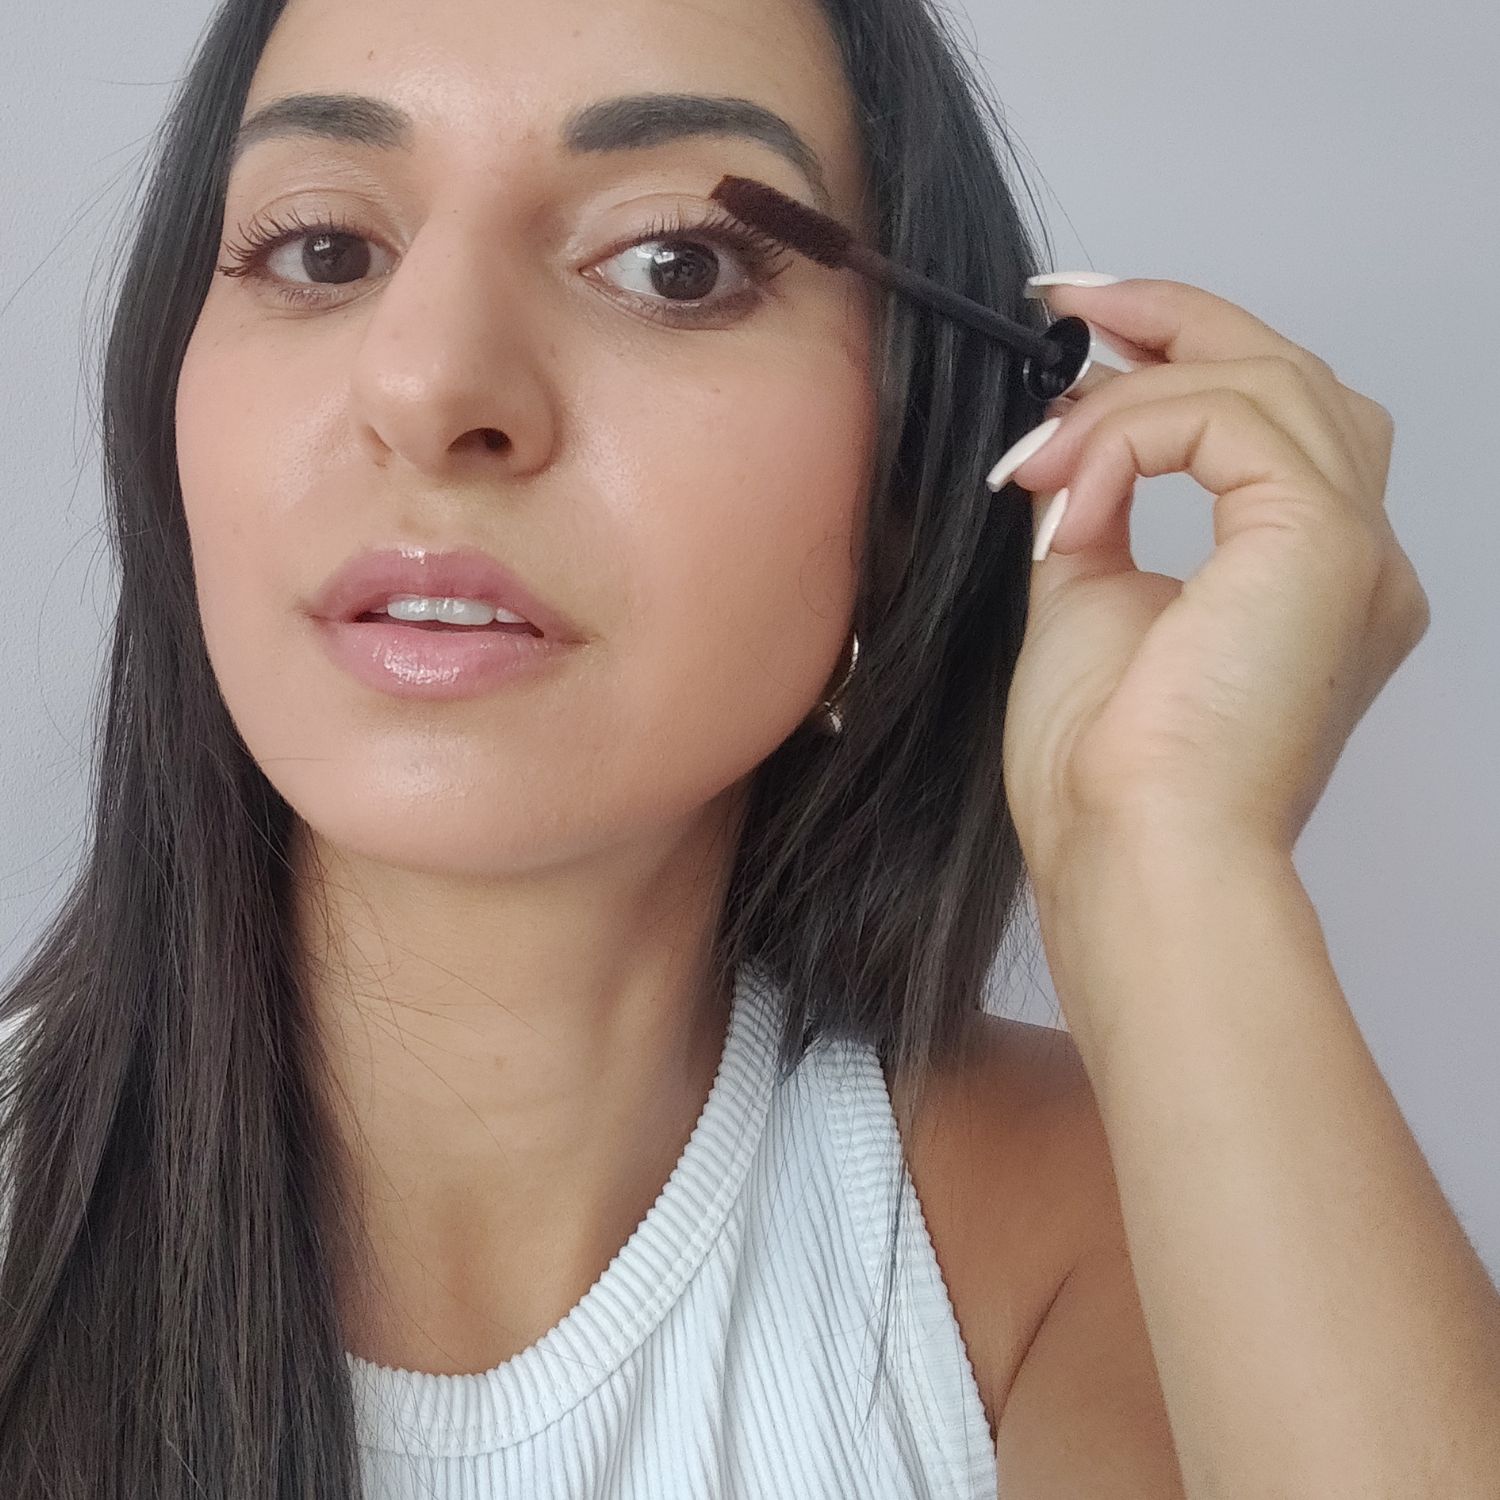  Clinique has launched a Black Honey mascara inspired by the cult lipstick—and I can confirm it's *so* good 